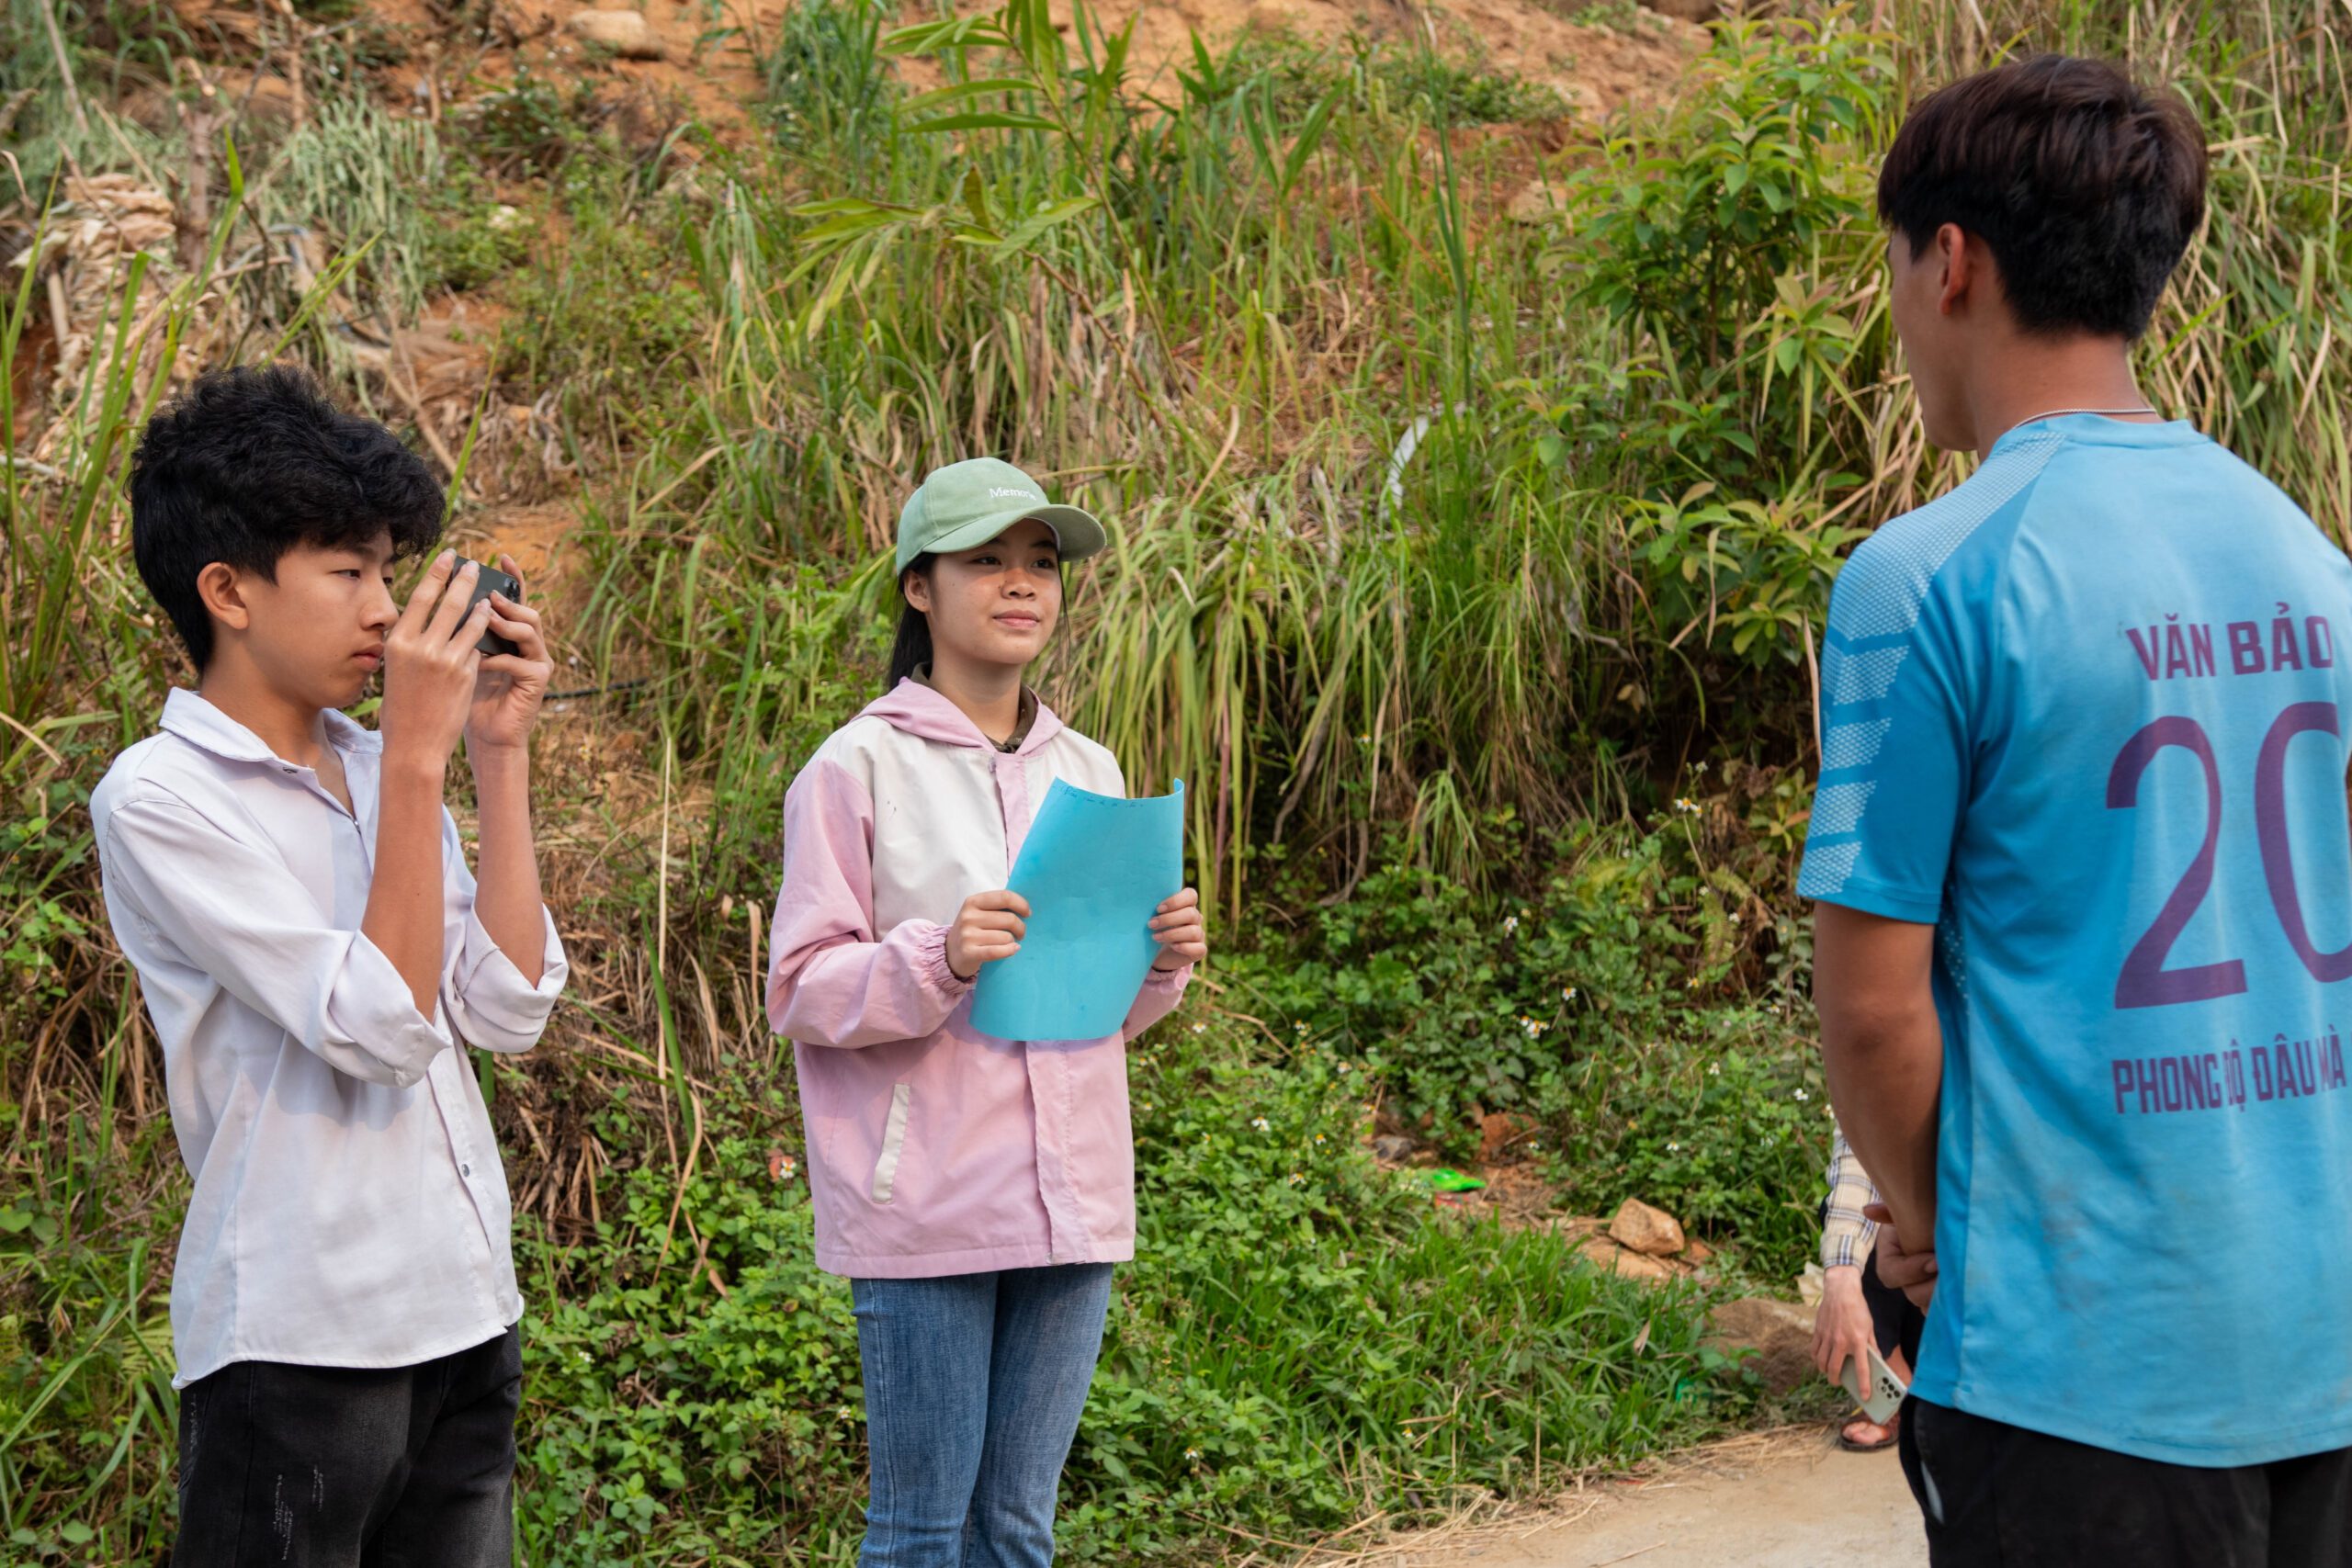 Huyen and her team interviewing a community member